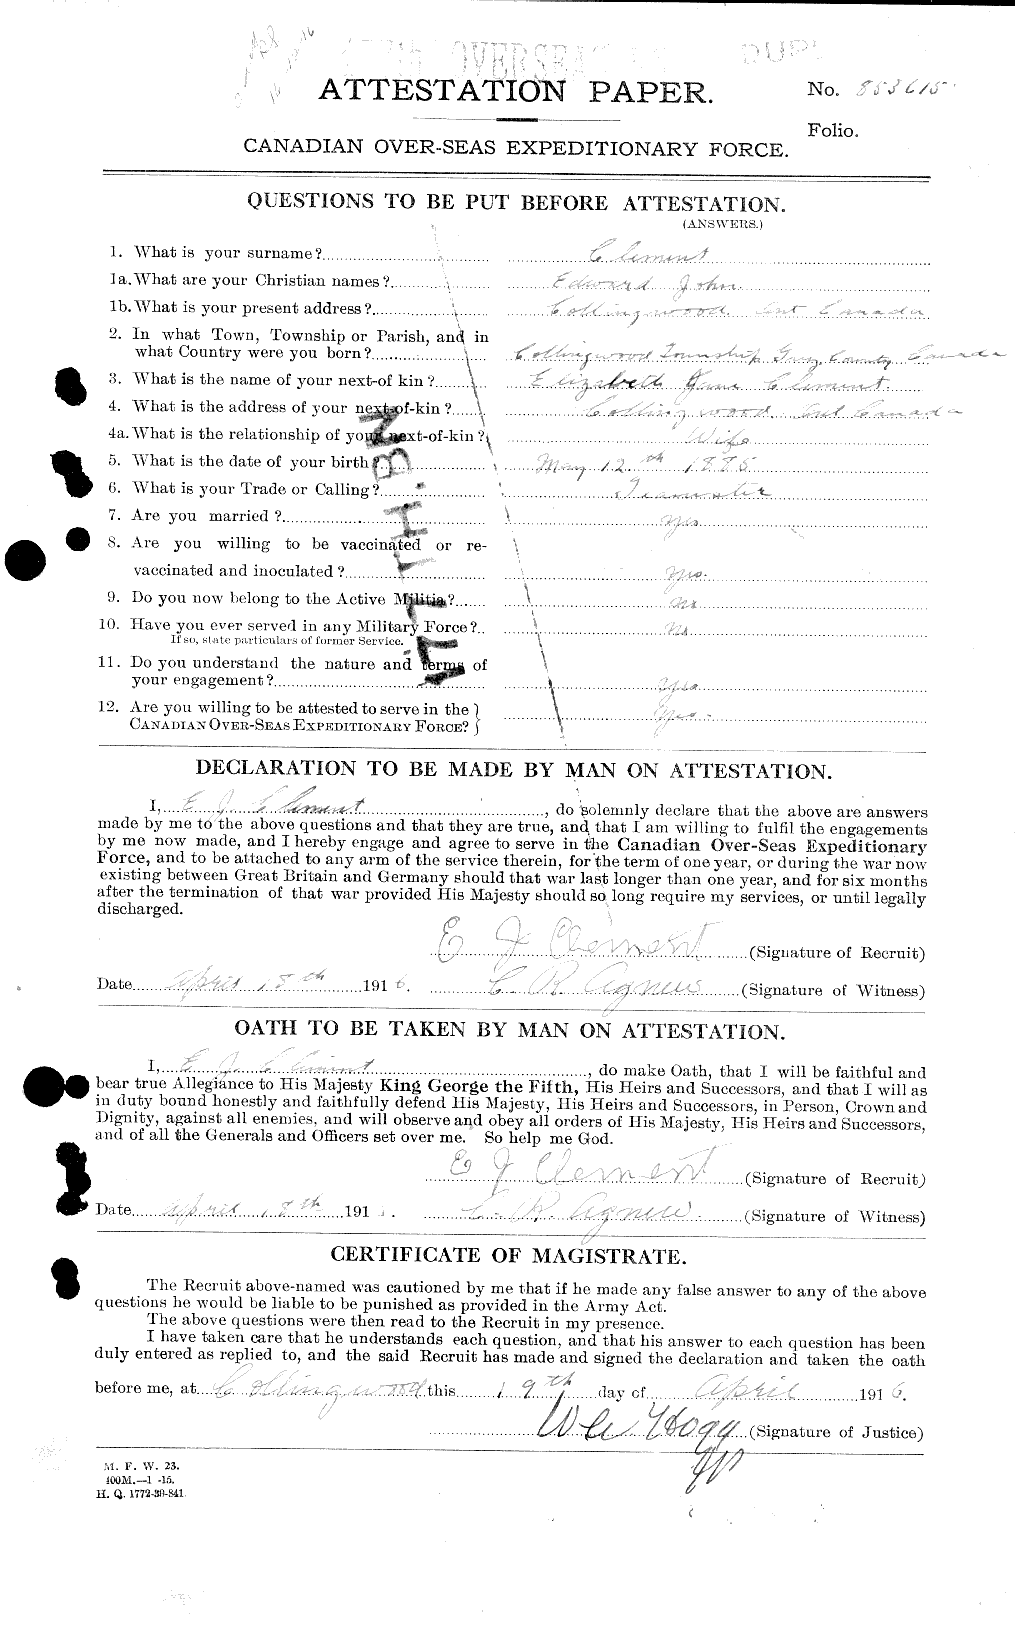 Personnel Records of the First World War - CEF 023832a